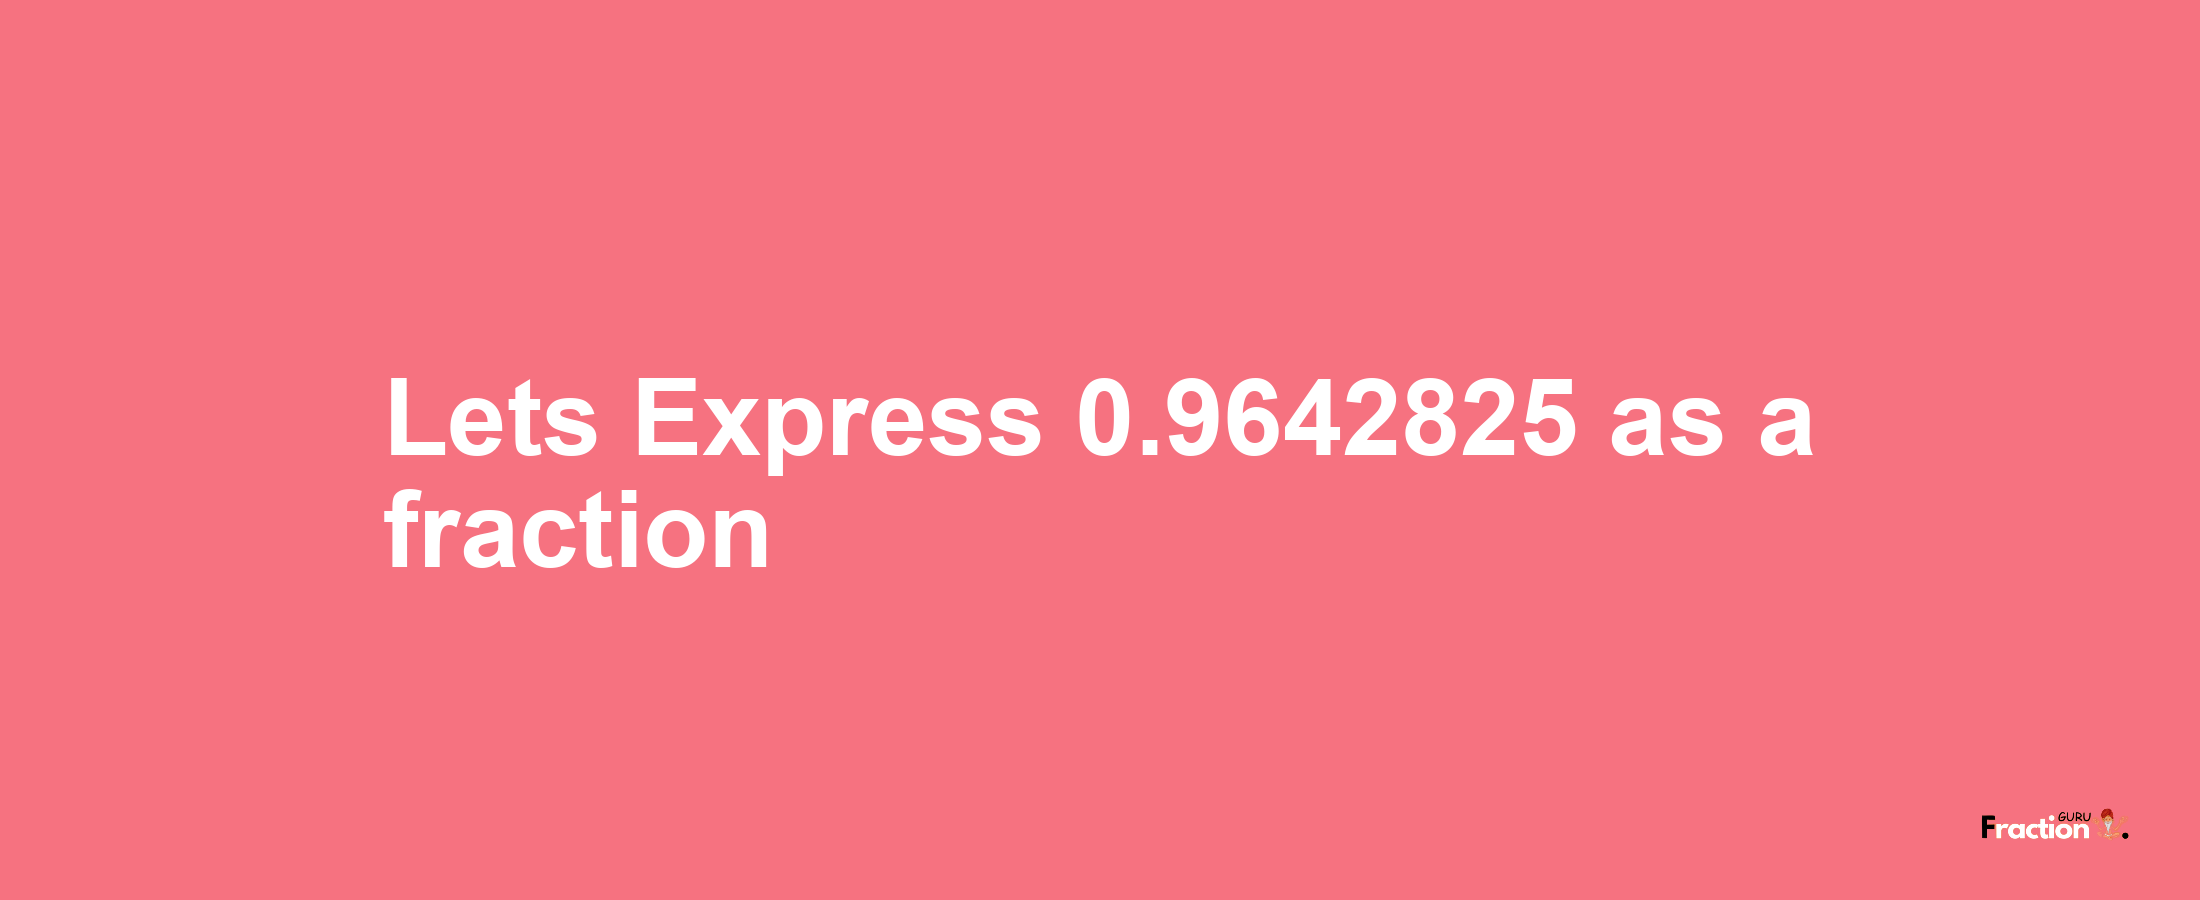 Lets Express 0.9642825 as afraction